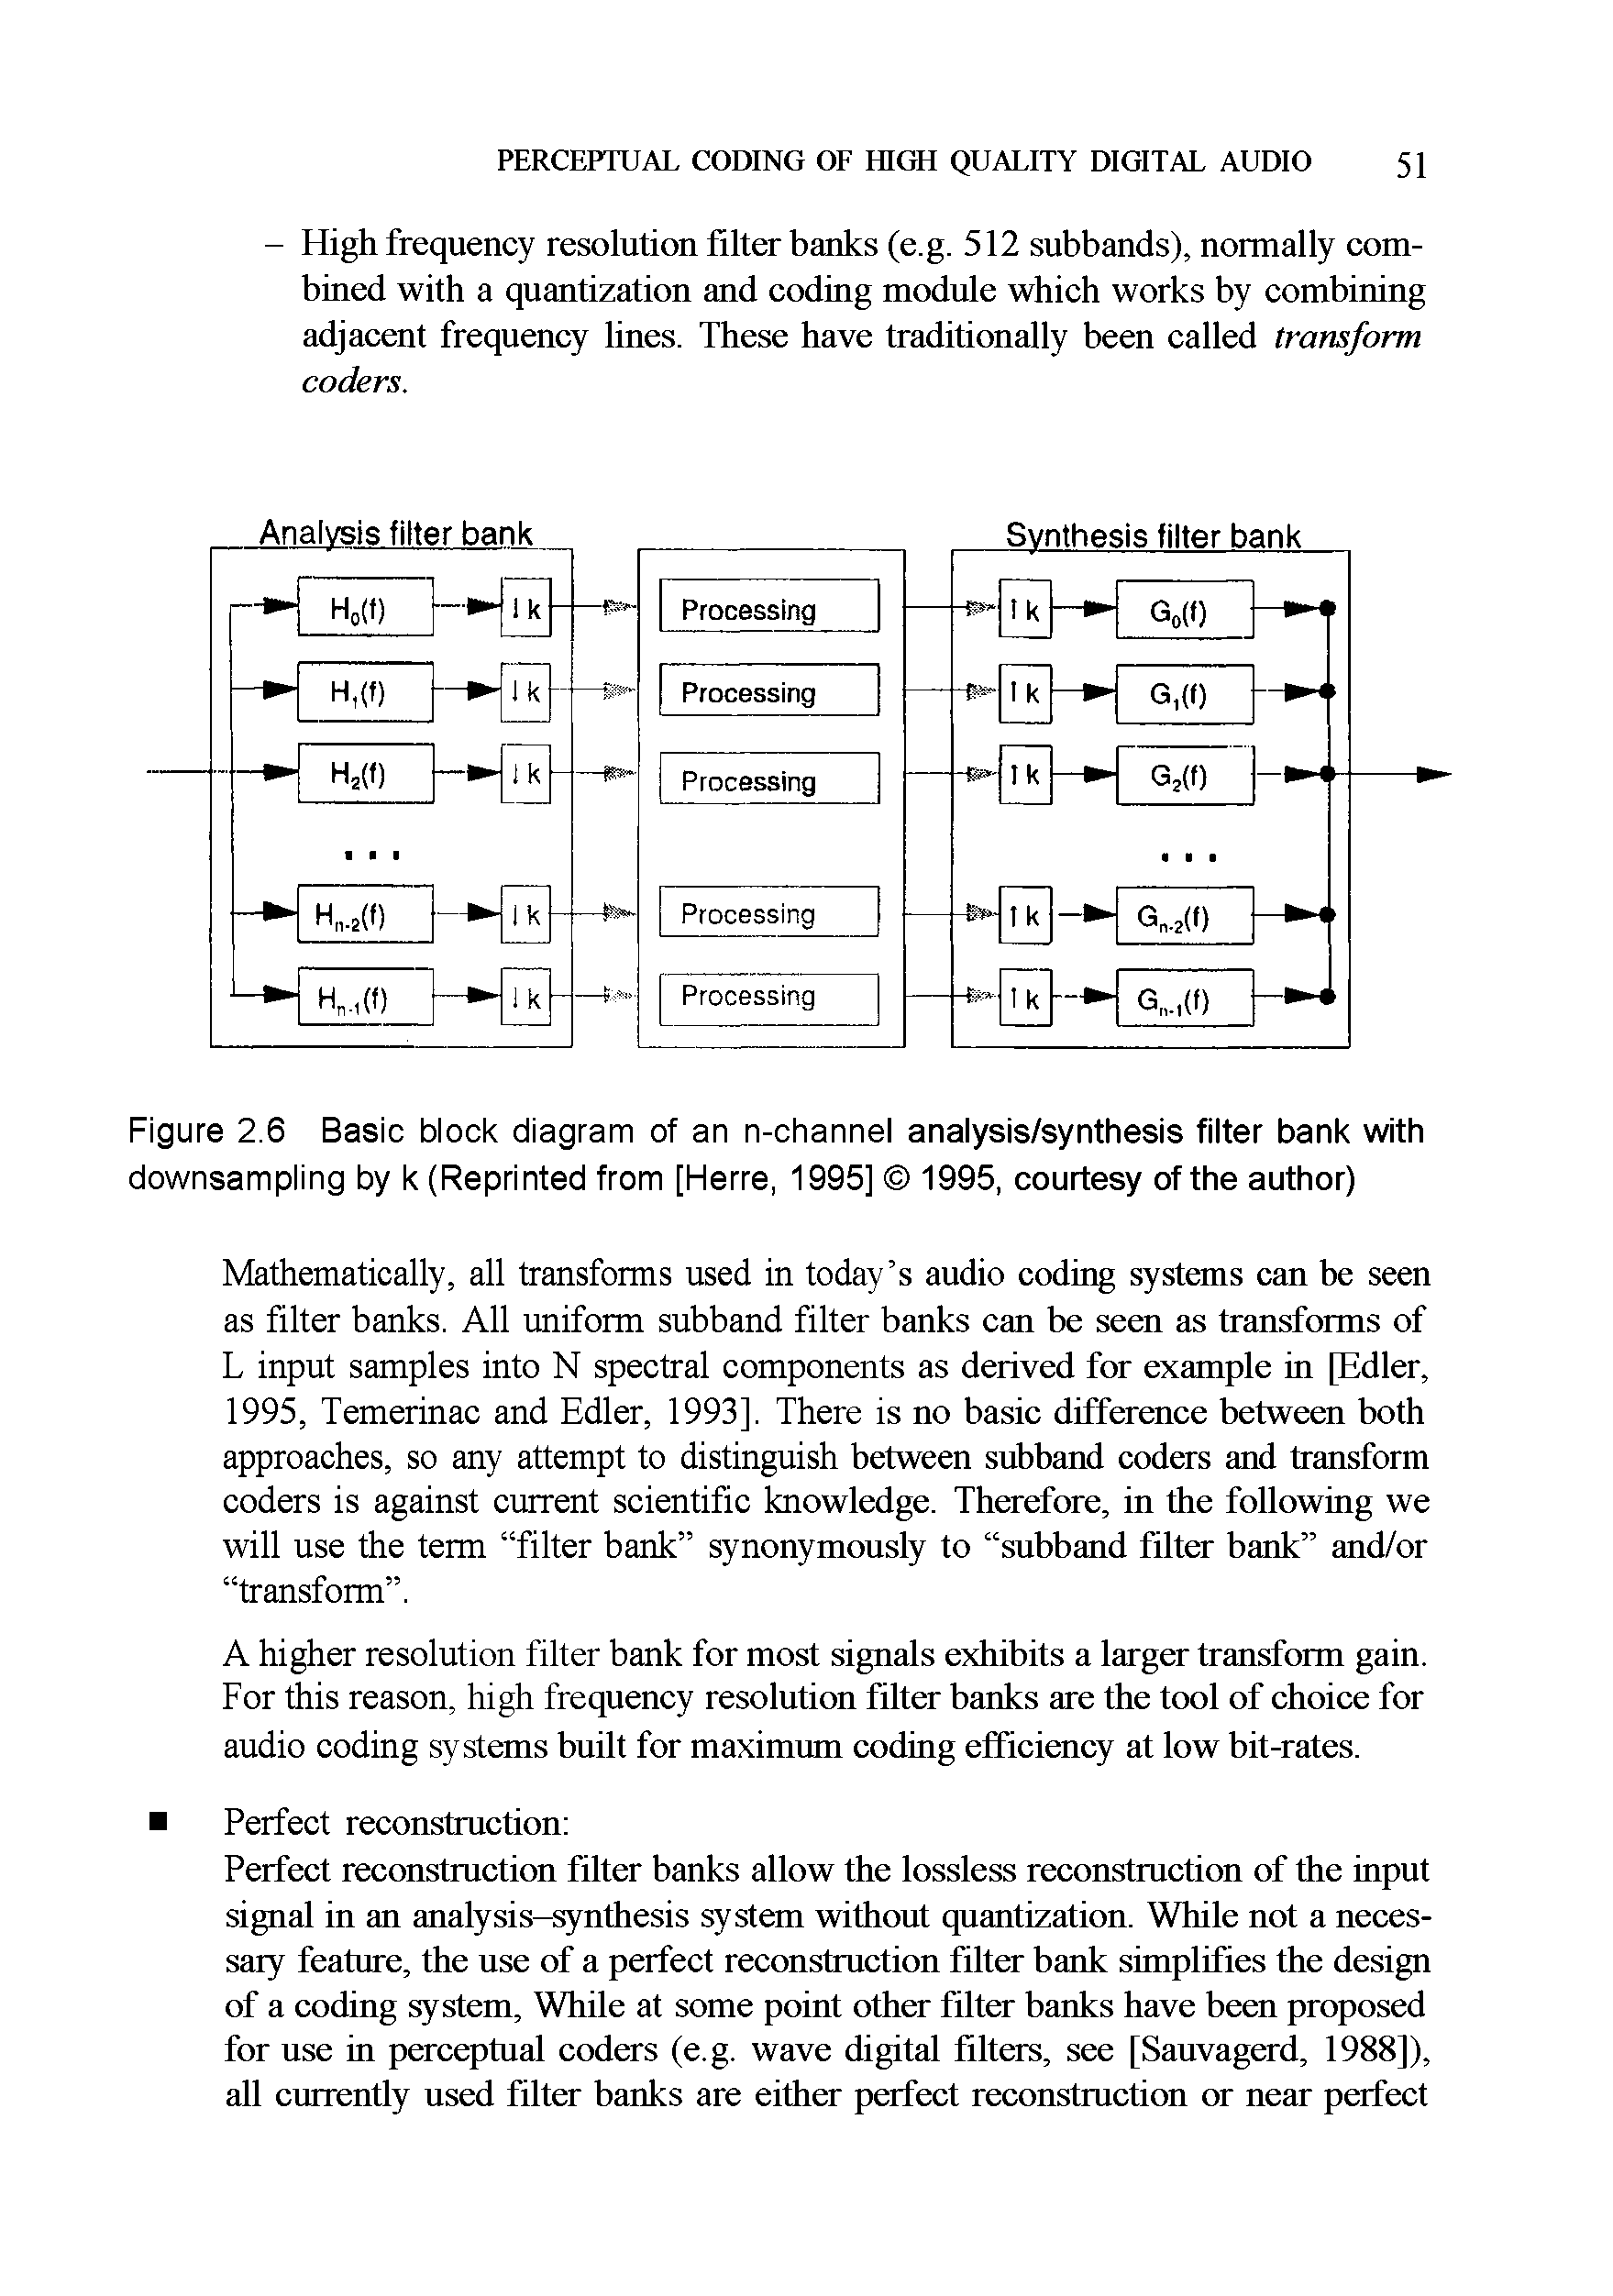 Figure 2.6 Basic block diagram of an n-channel analysis/synthesis filter bank with downsampling by k (Reprinted from [Herre, 1995] 1995, courtesy of the author)...